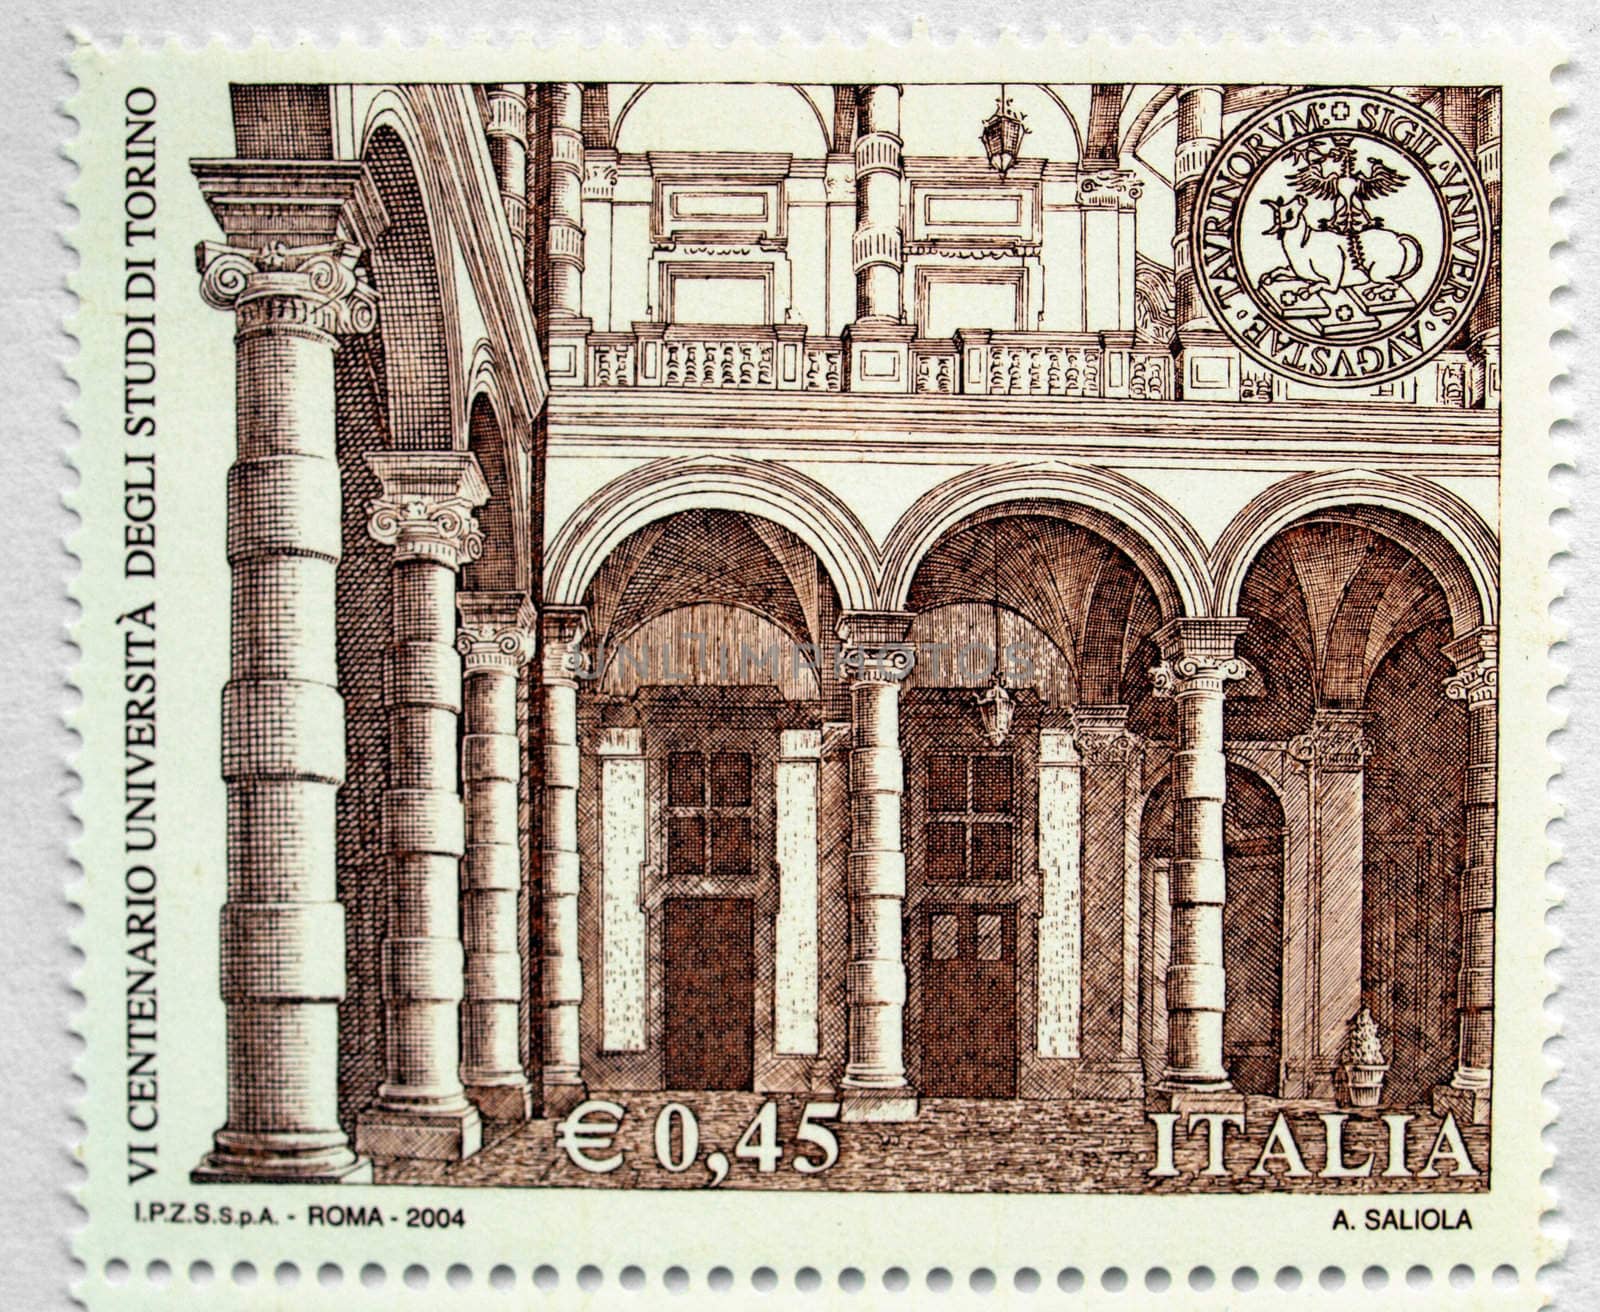 Range of Italian postage stamps from Italy